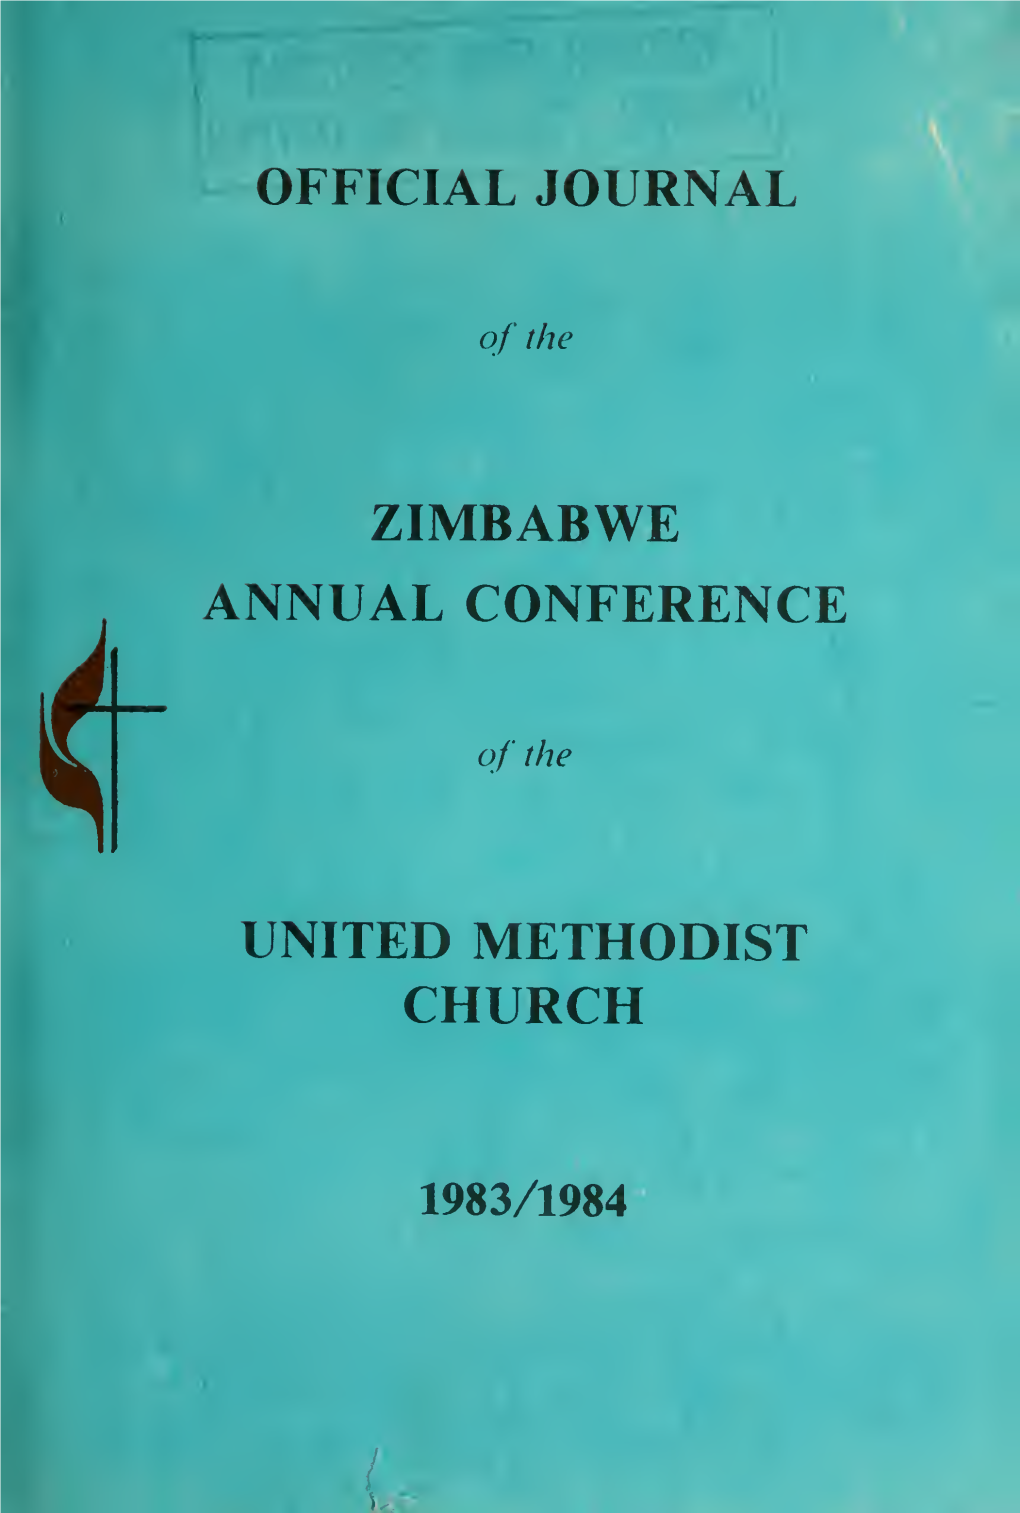 Official Journal of the Third Session of the Zimbabwe Annual Conference